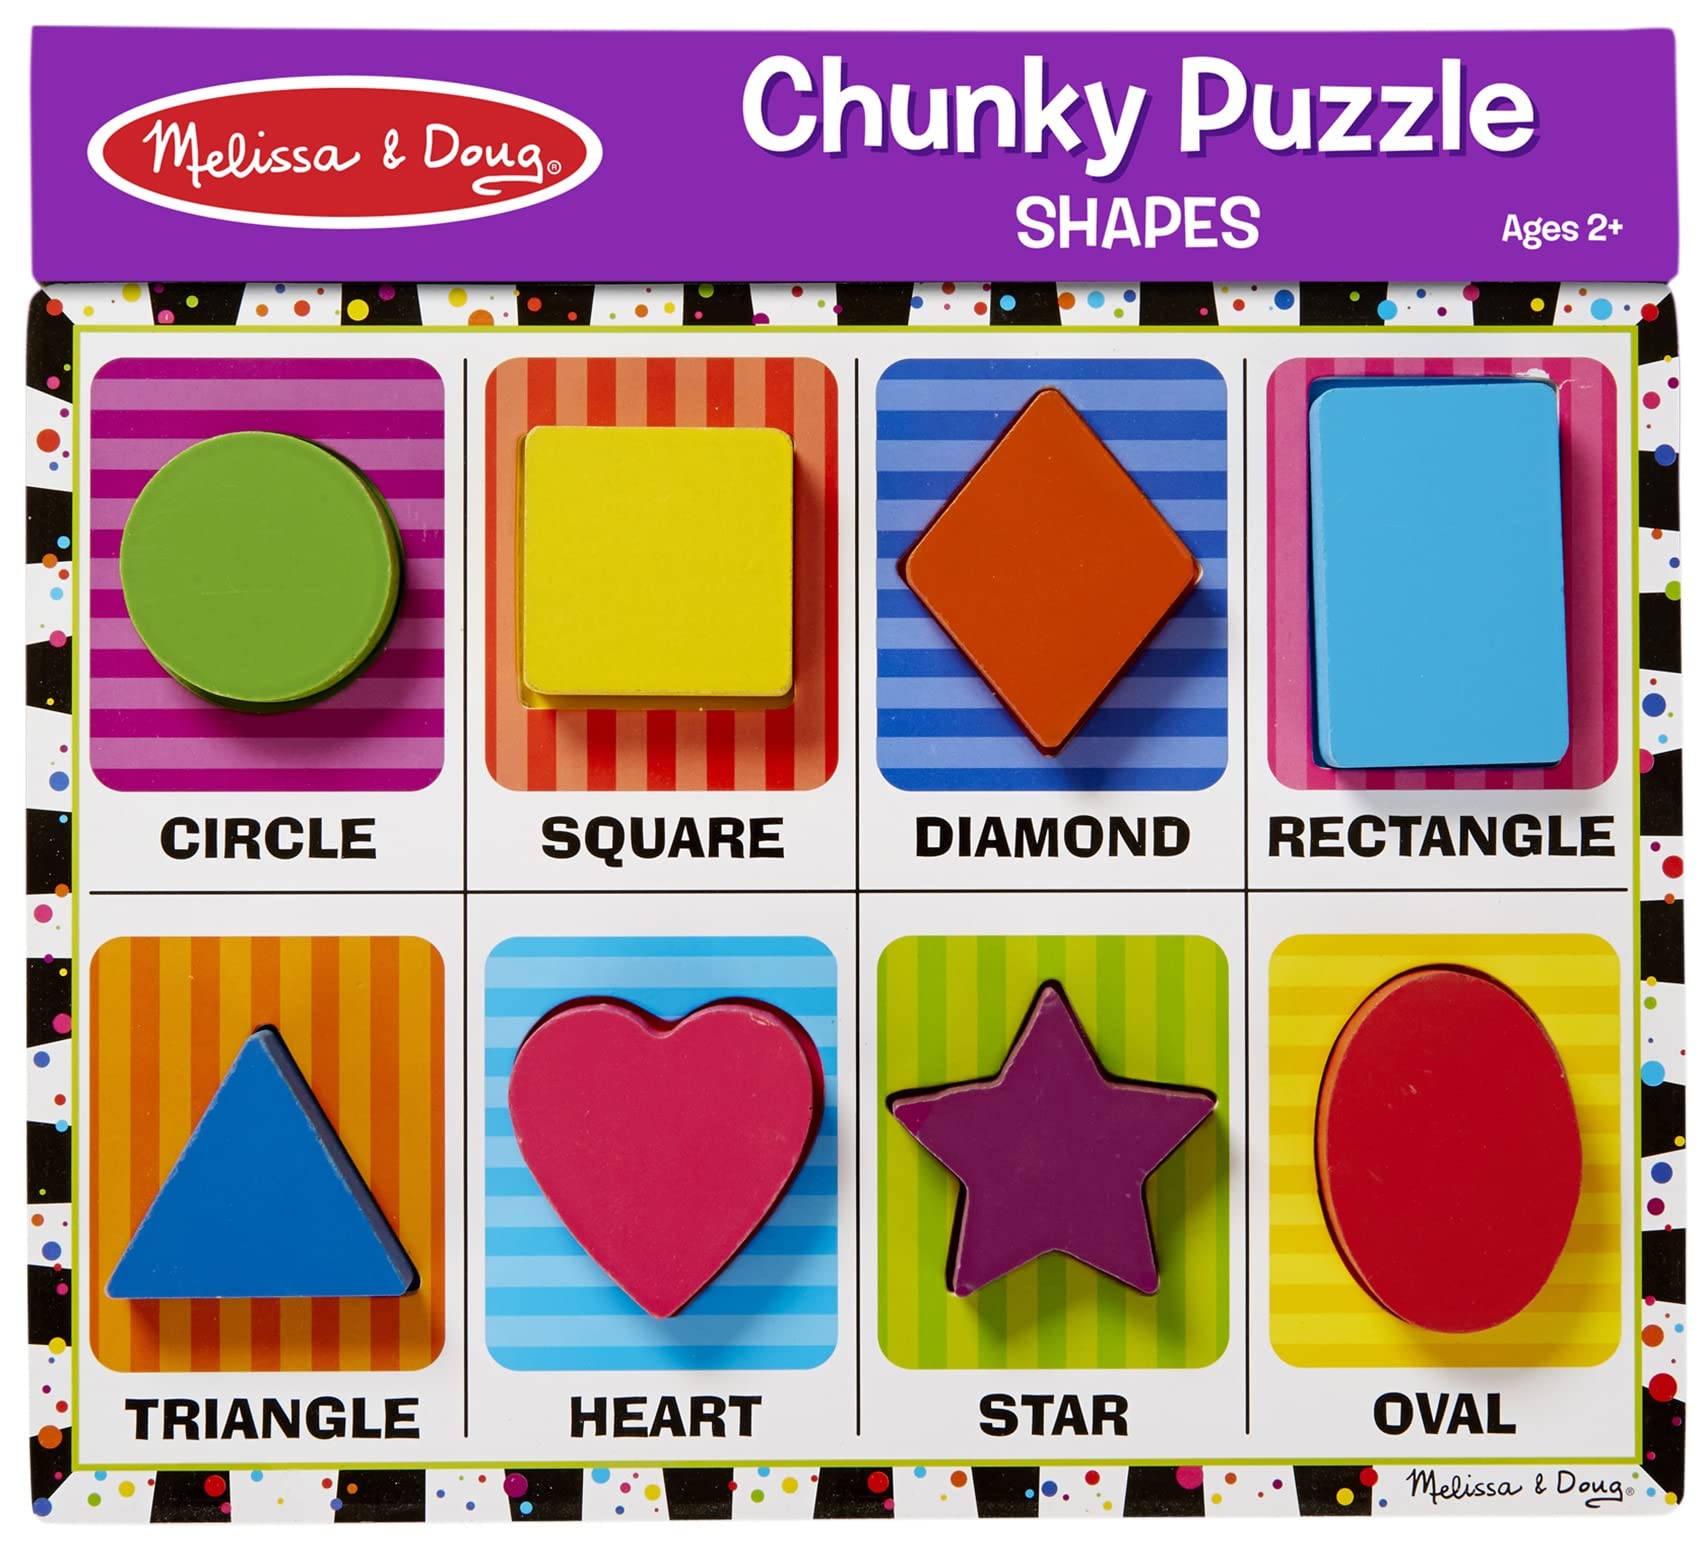 8-Piece Melissa & Doug Shapes Wooden Chunky Puzzle $5 + Free Shipping w/ Prime or on $35+